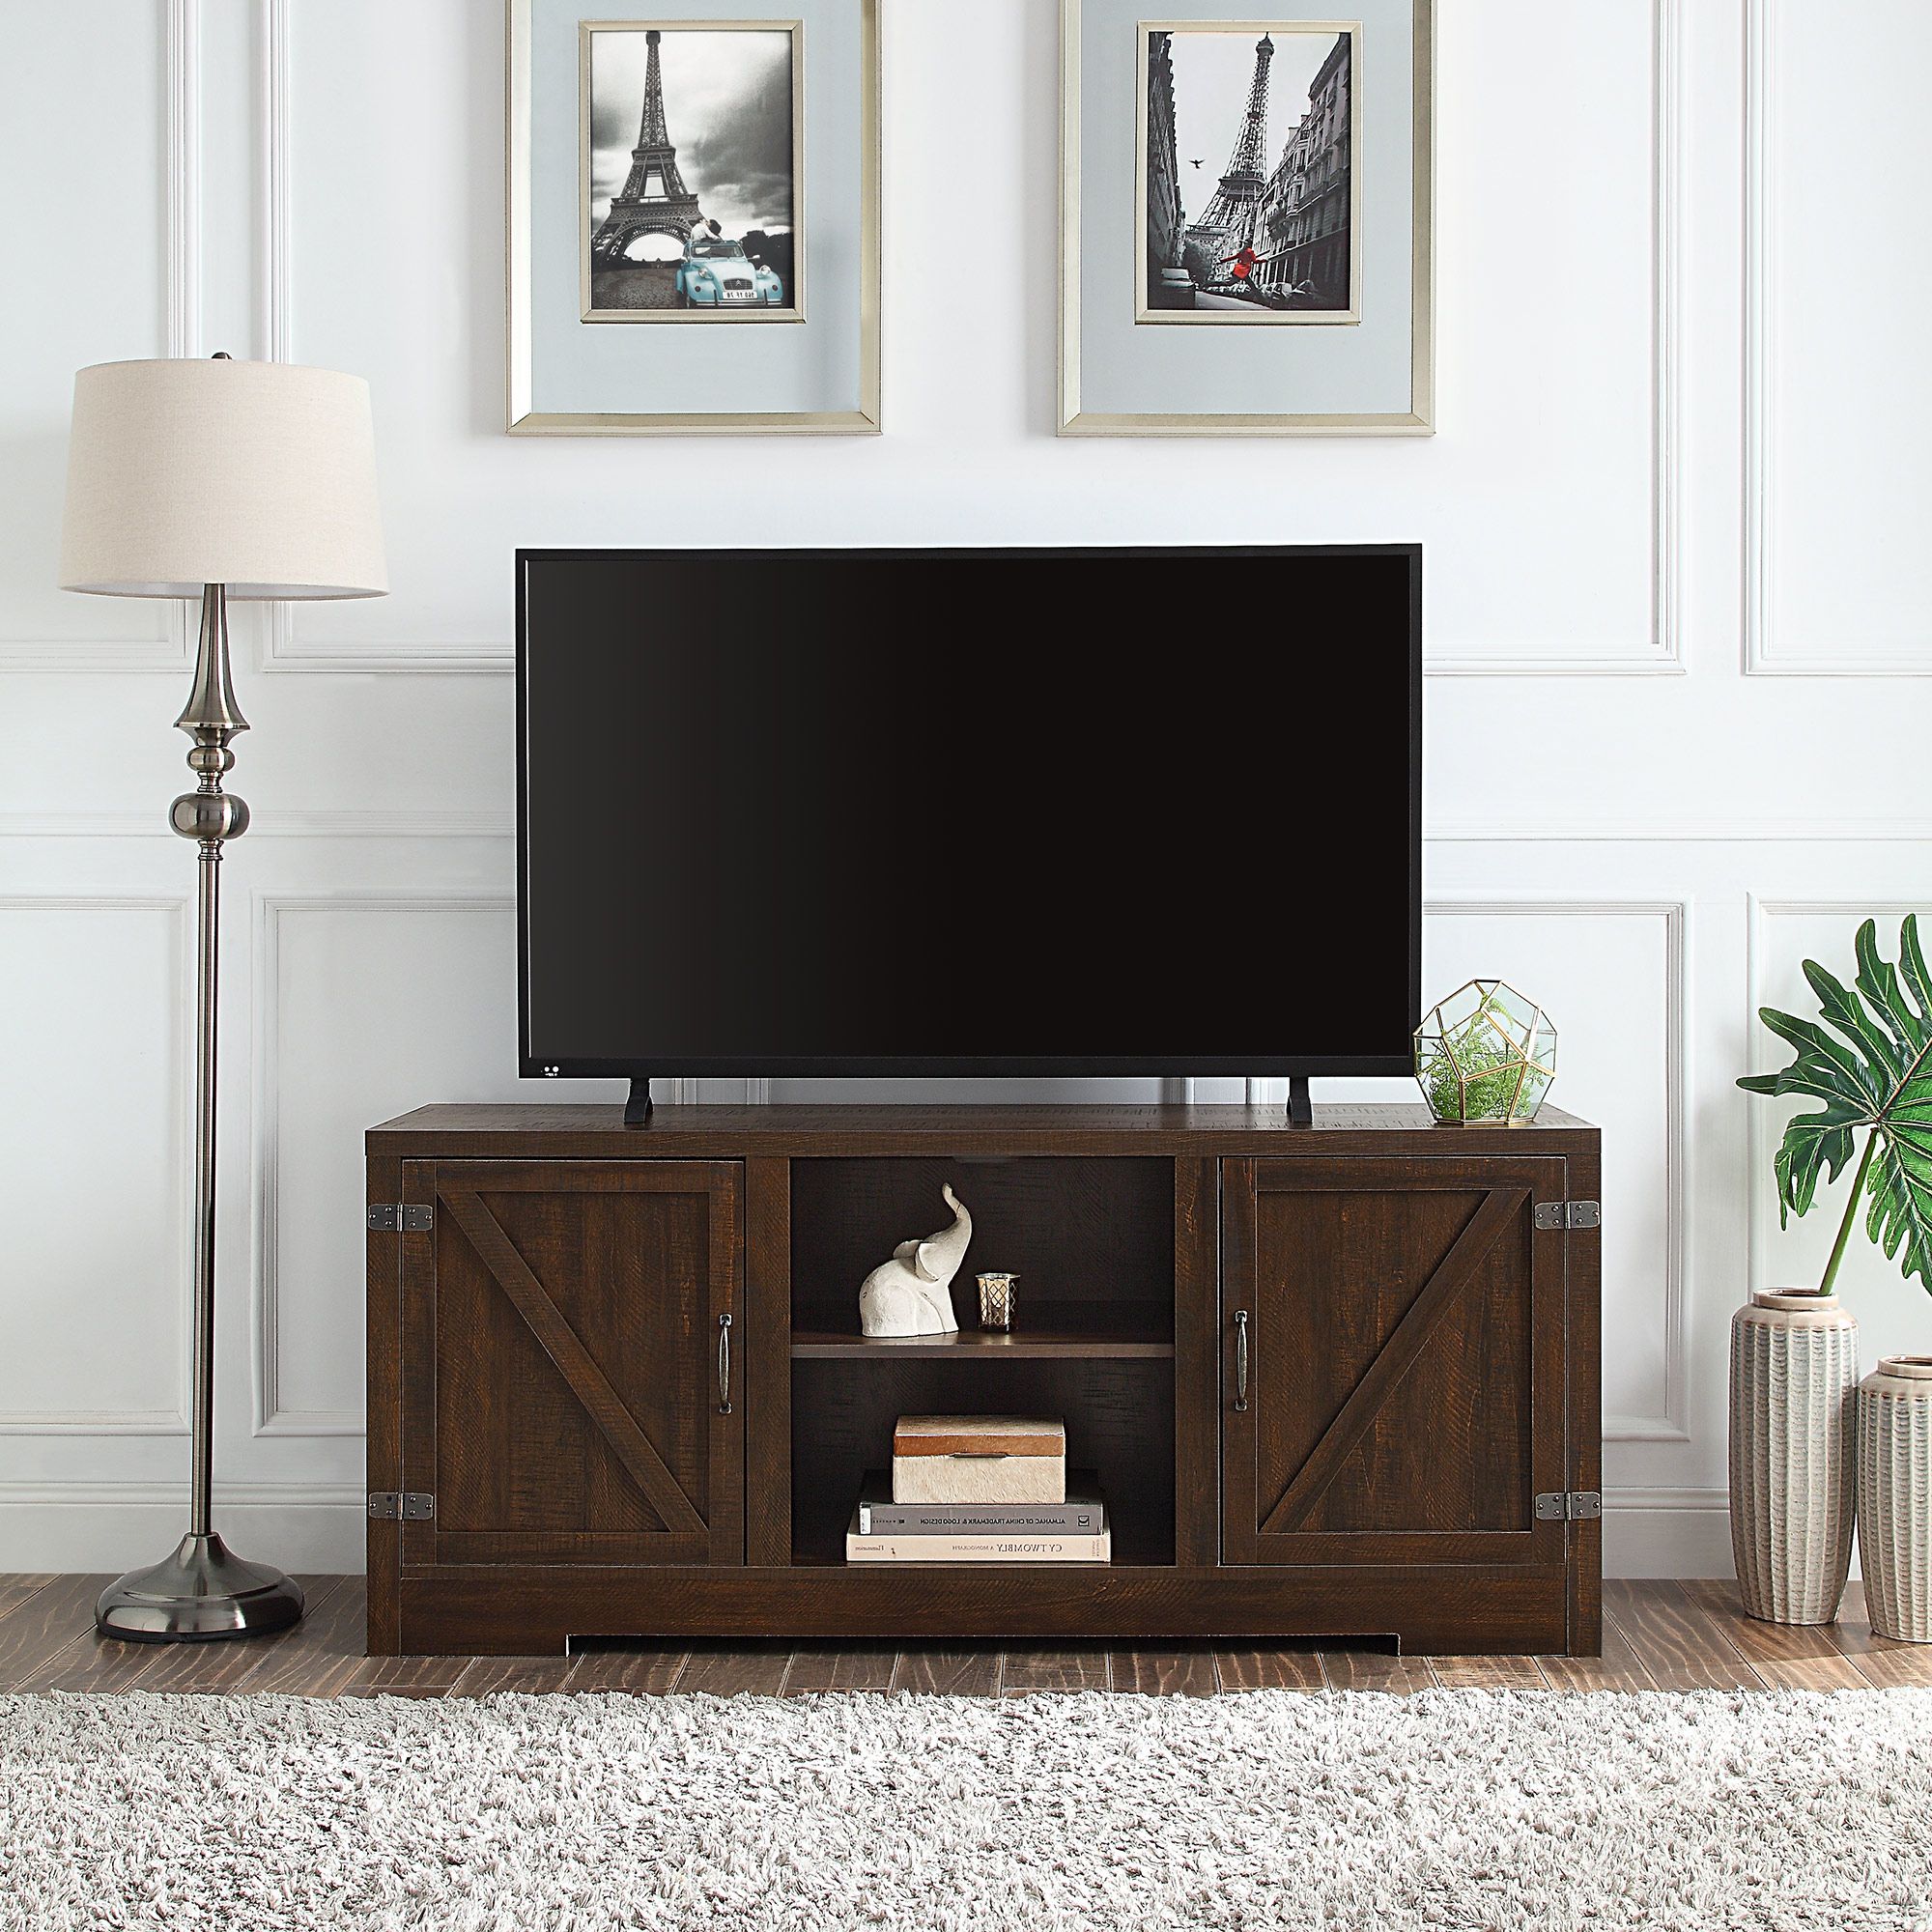 Belleze Hilo 58 Inch Barn Door Tv Stand Console For Tvs Up Pertaining To Kamari Tv Stands For Tvs Up To 58" (View 10 of 20)